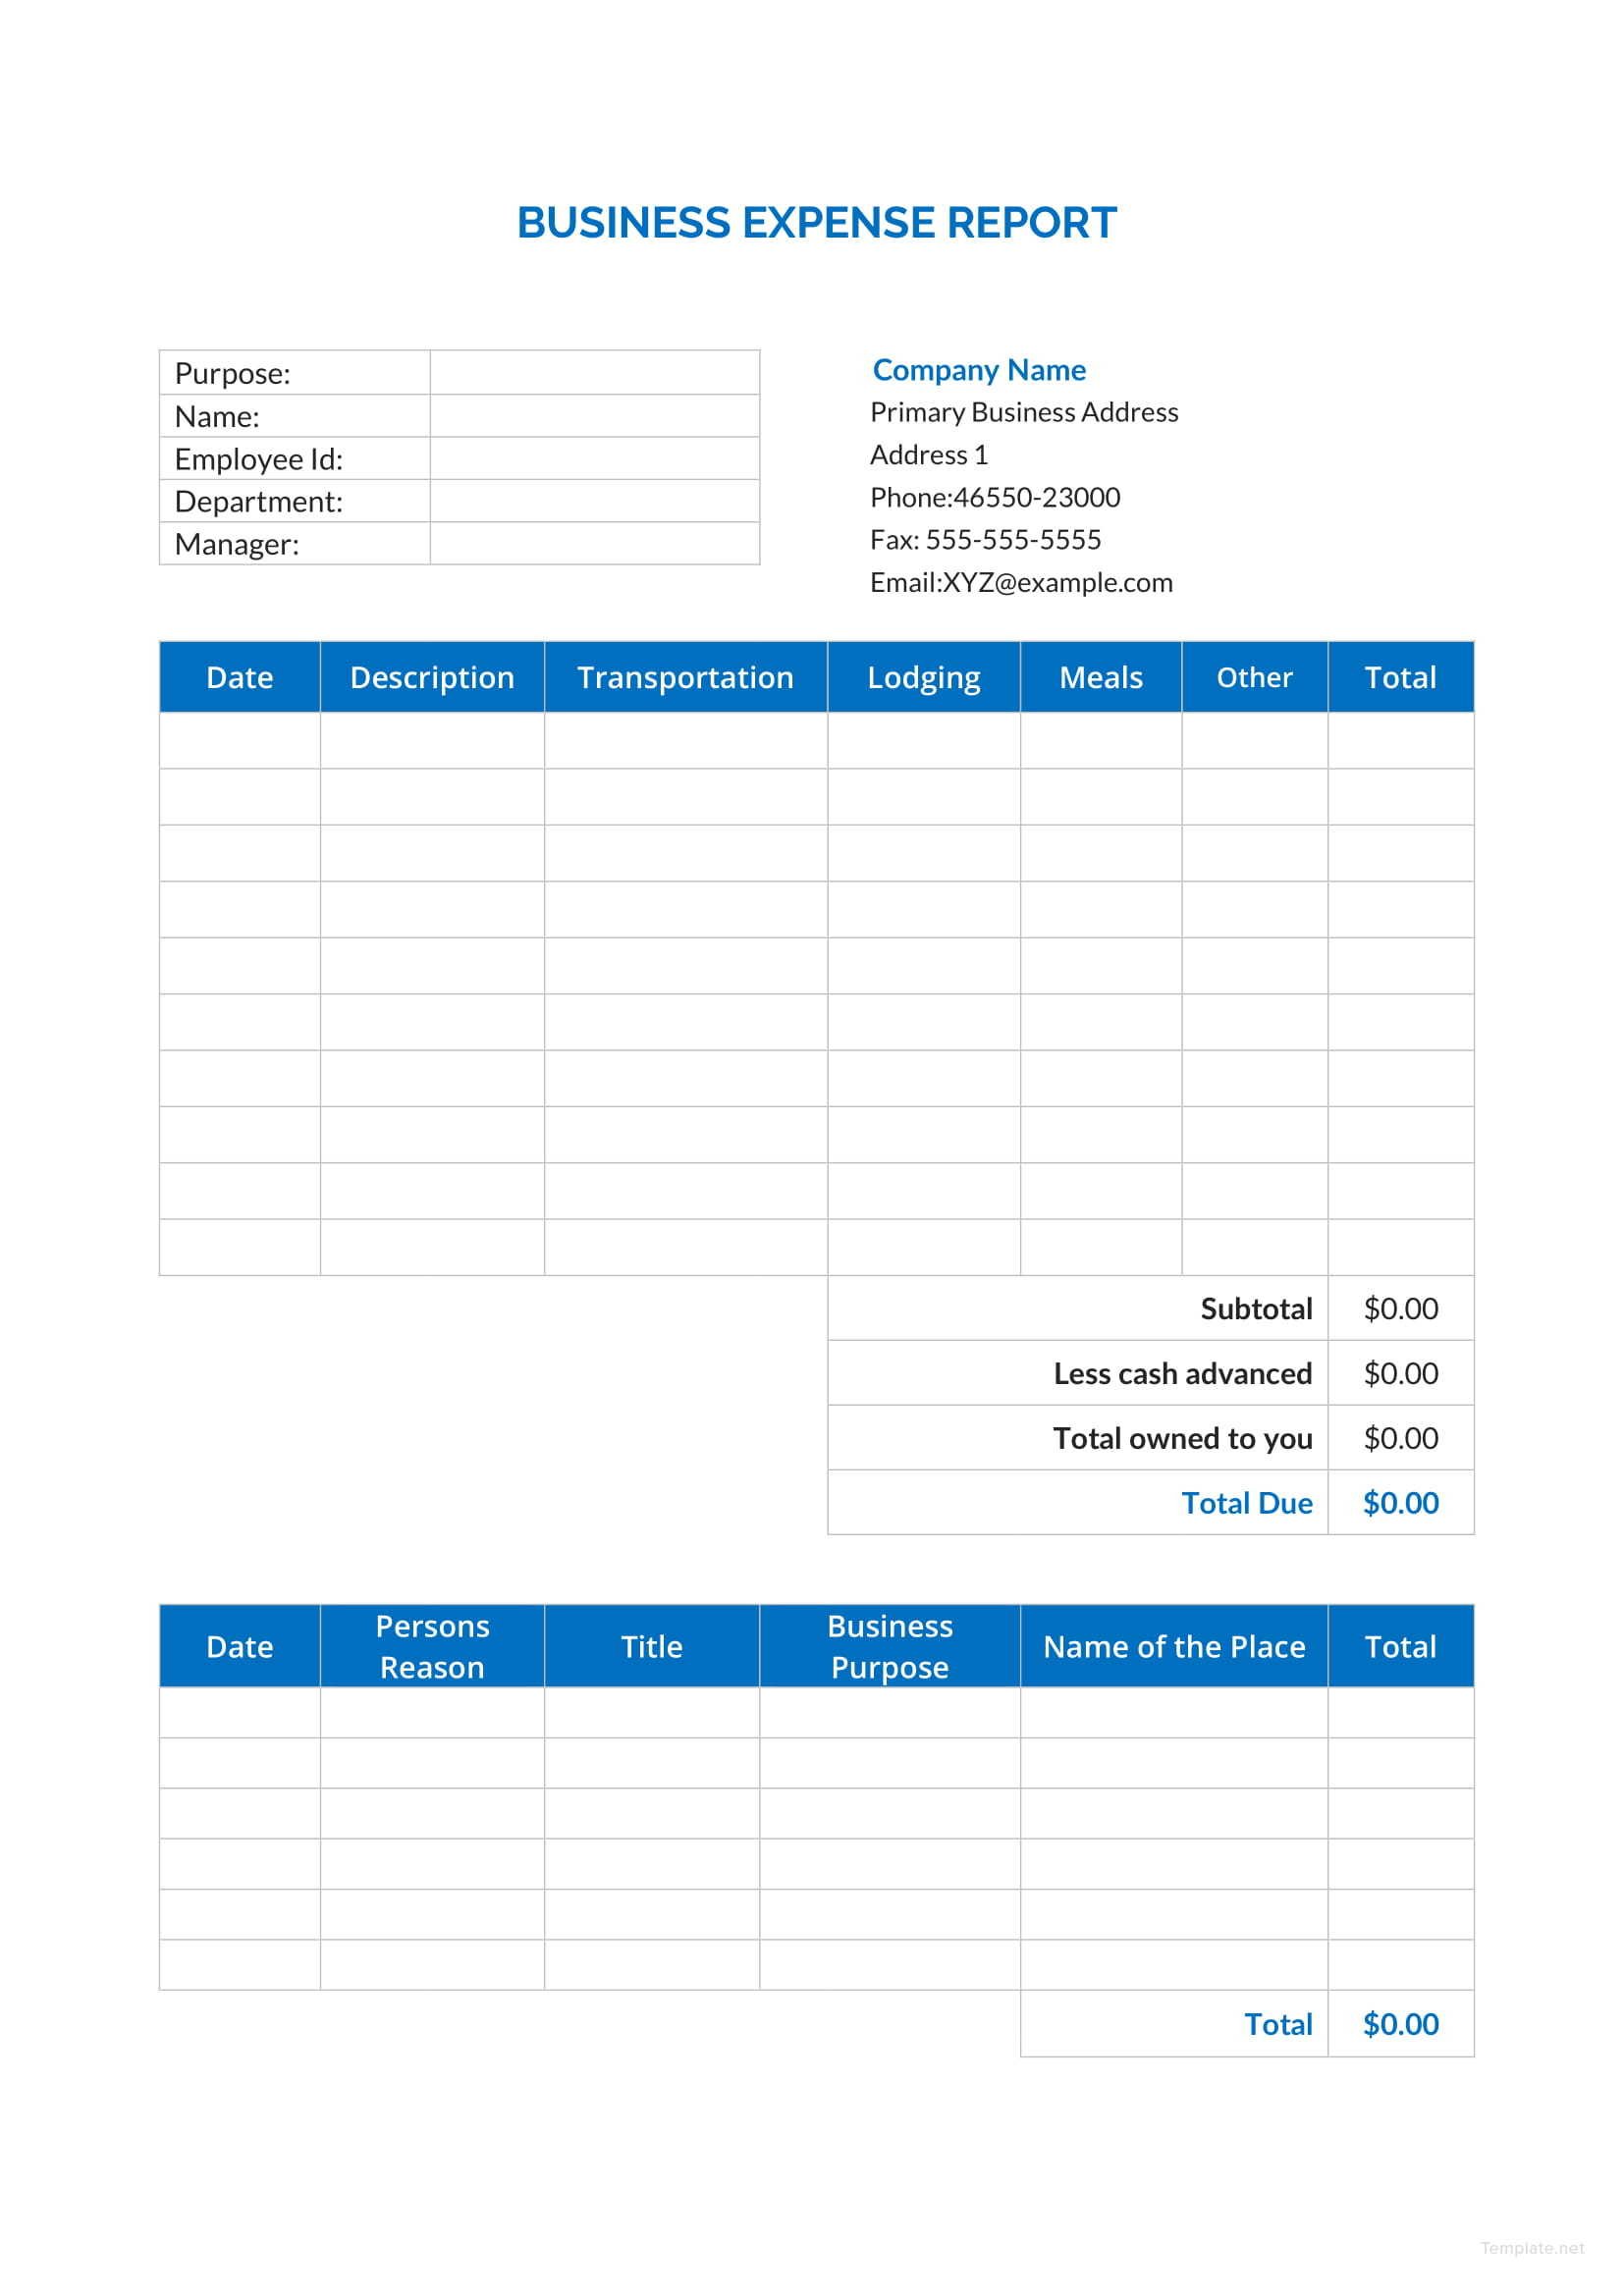 Business Expense Report Excel ~ Excel Templates